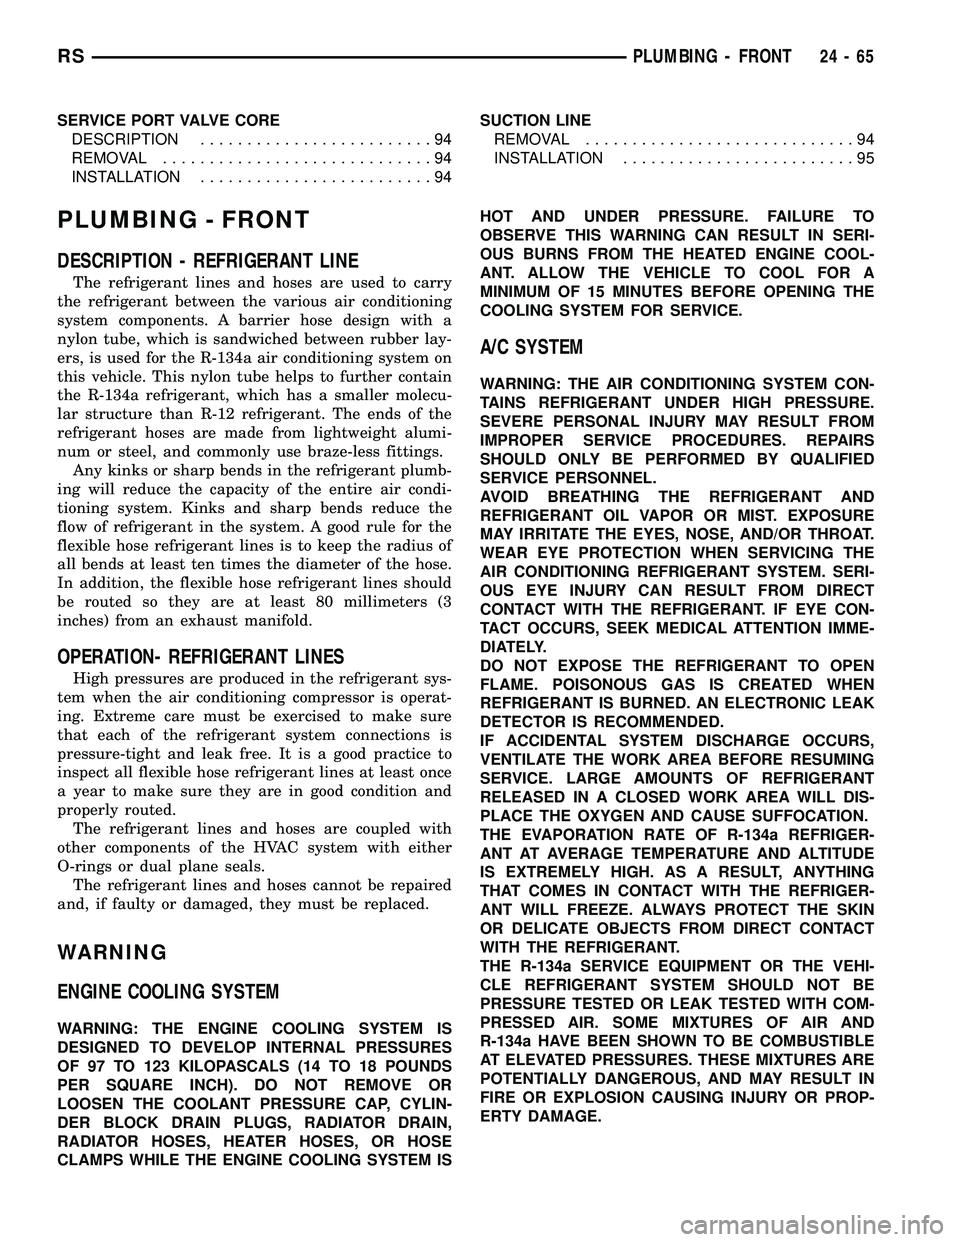 CHRYSLER VOYAGER 2004  Service Manual SERVICE PORT VALVE CORE
DESCRIPTION.........................94
REMOVAL.............................94
INSTALLATION.........................94SUCTION LINE
REMOVAL.............................94
INSTALL